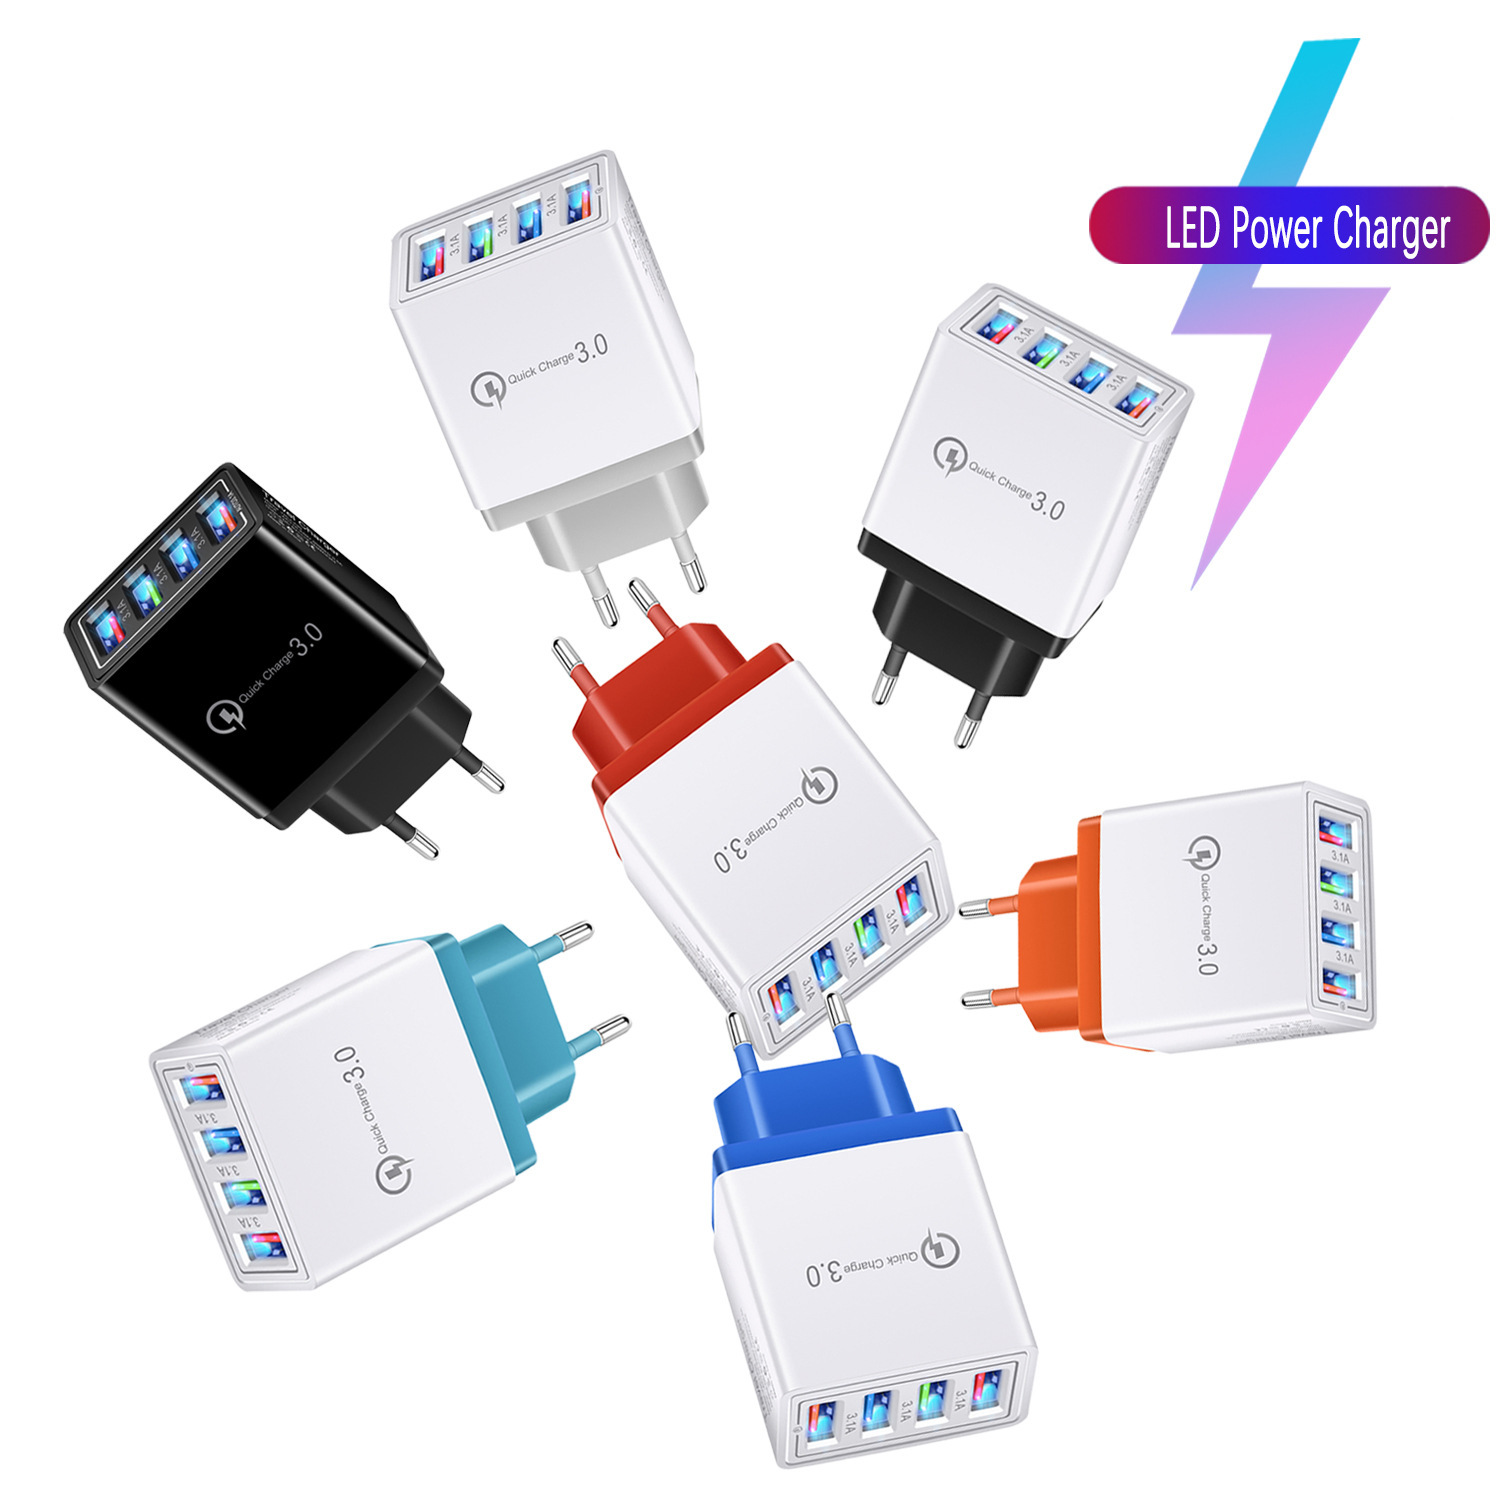 

Fast Adaptive 5V 3.1A Wall Charger USB Wall Chargering Power Adapter for Iphone Samsung Galaxy S6 S8 S10 Android Phone Pc Mp3